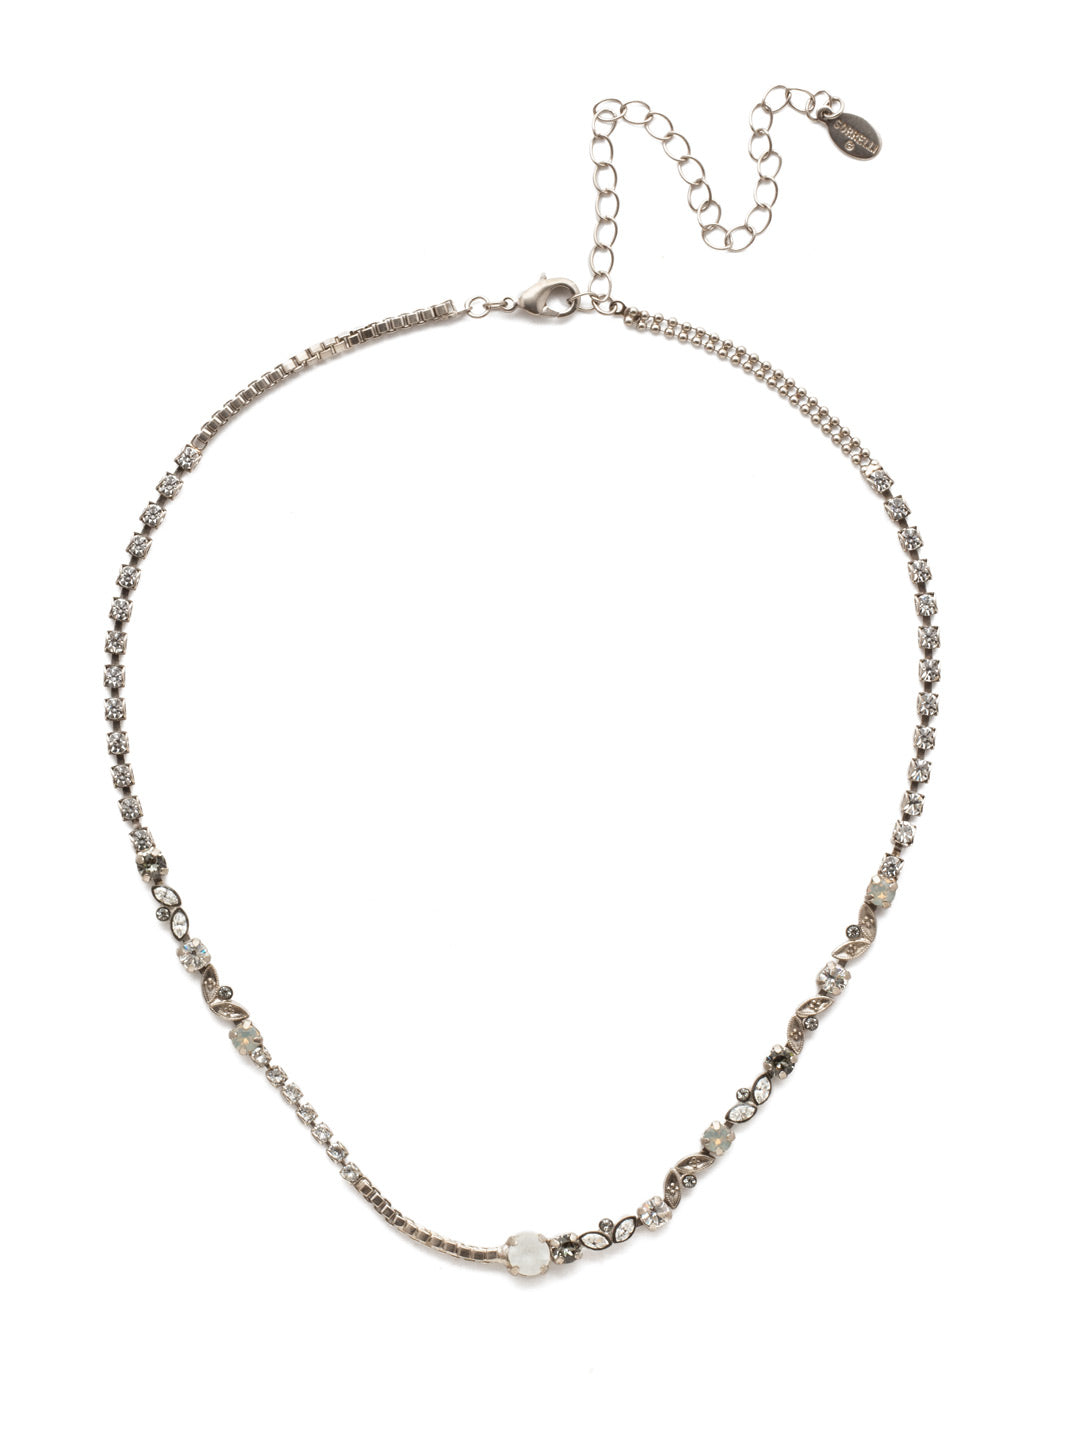 Juliette Tennis Necklace - NEN13ASSTC - <p>The Juliette Tennis Necklace sparkles and shines from every angle with its varying crystal shapes, eye-cathing metal detail, and an adjustable length closure. From Sorrelli's Storm Clouds collection in our Antique Silver-tone finish.</p>